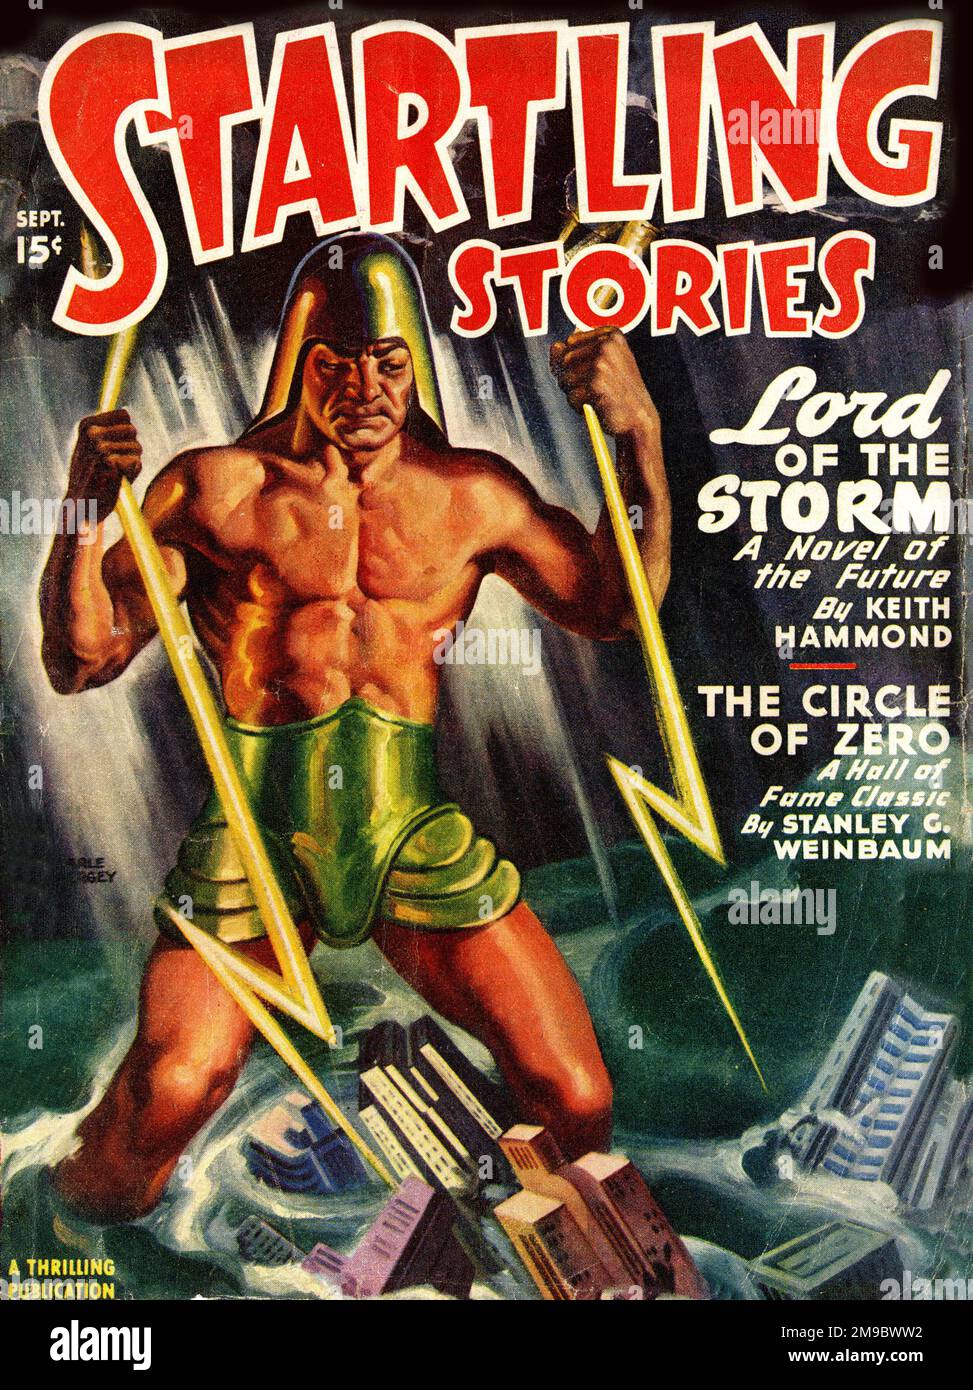 Cover design, Startling Stories, science fiction pulp magazine, September 1947 Stock Photo